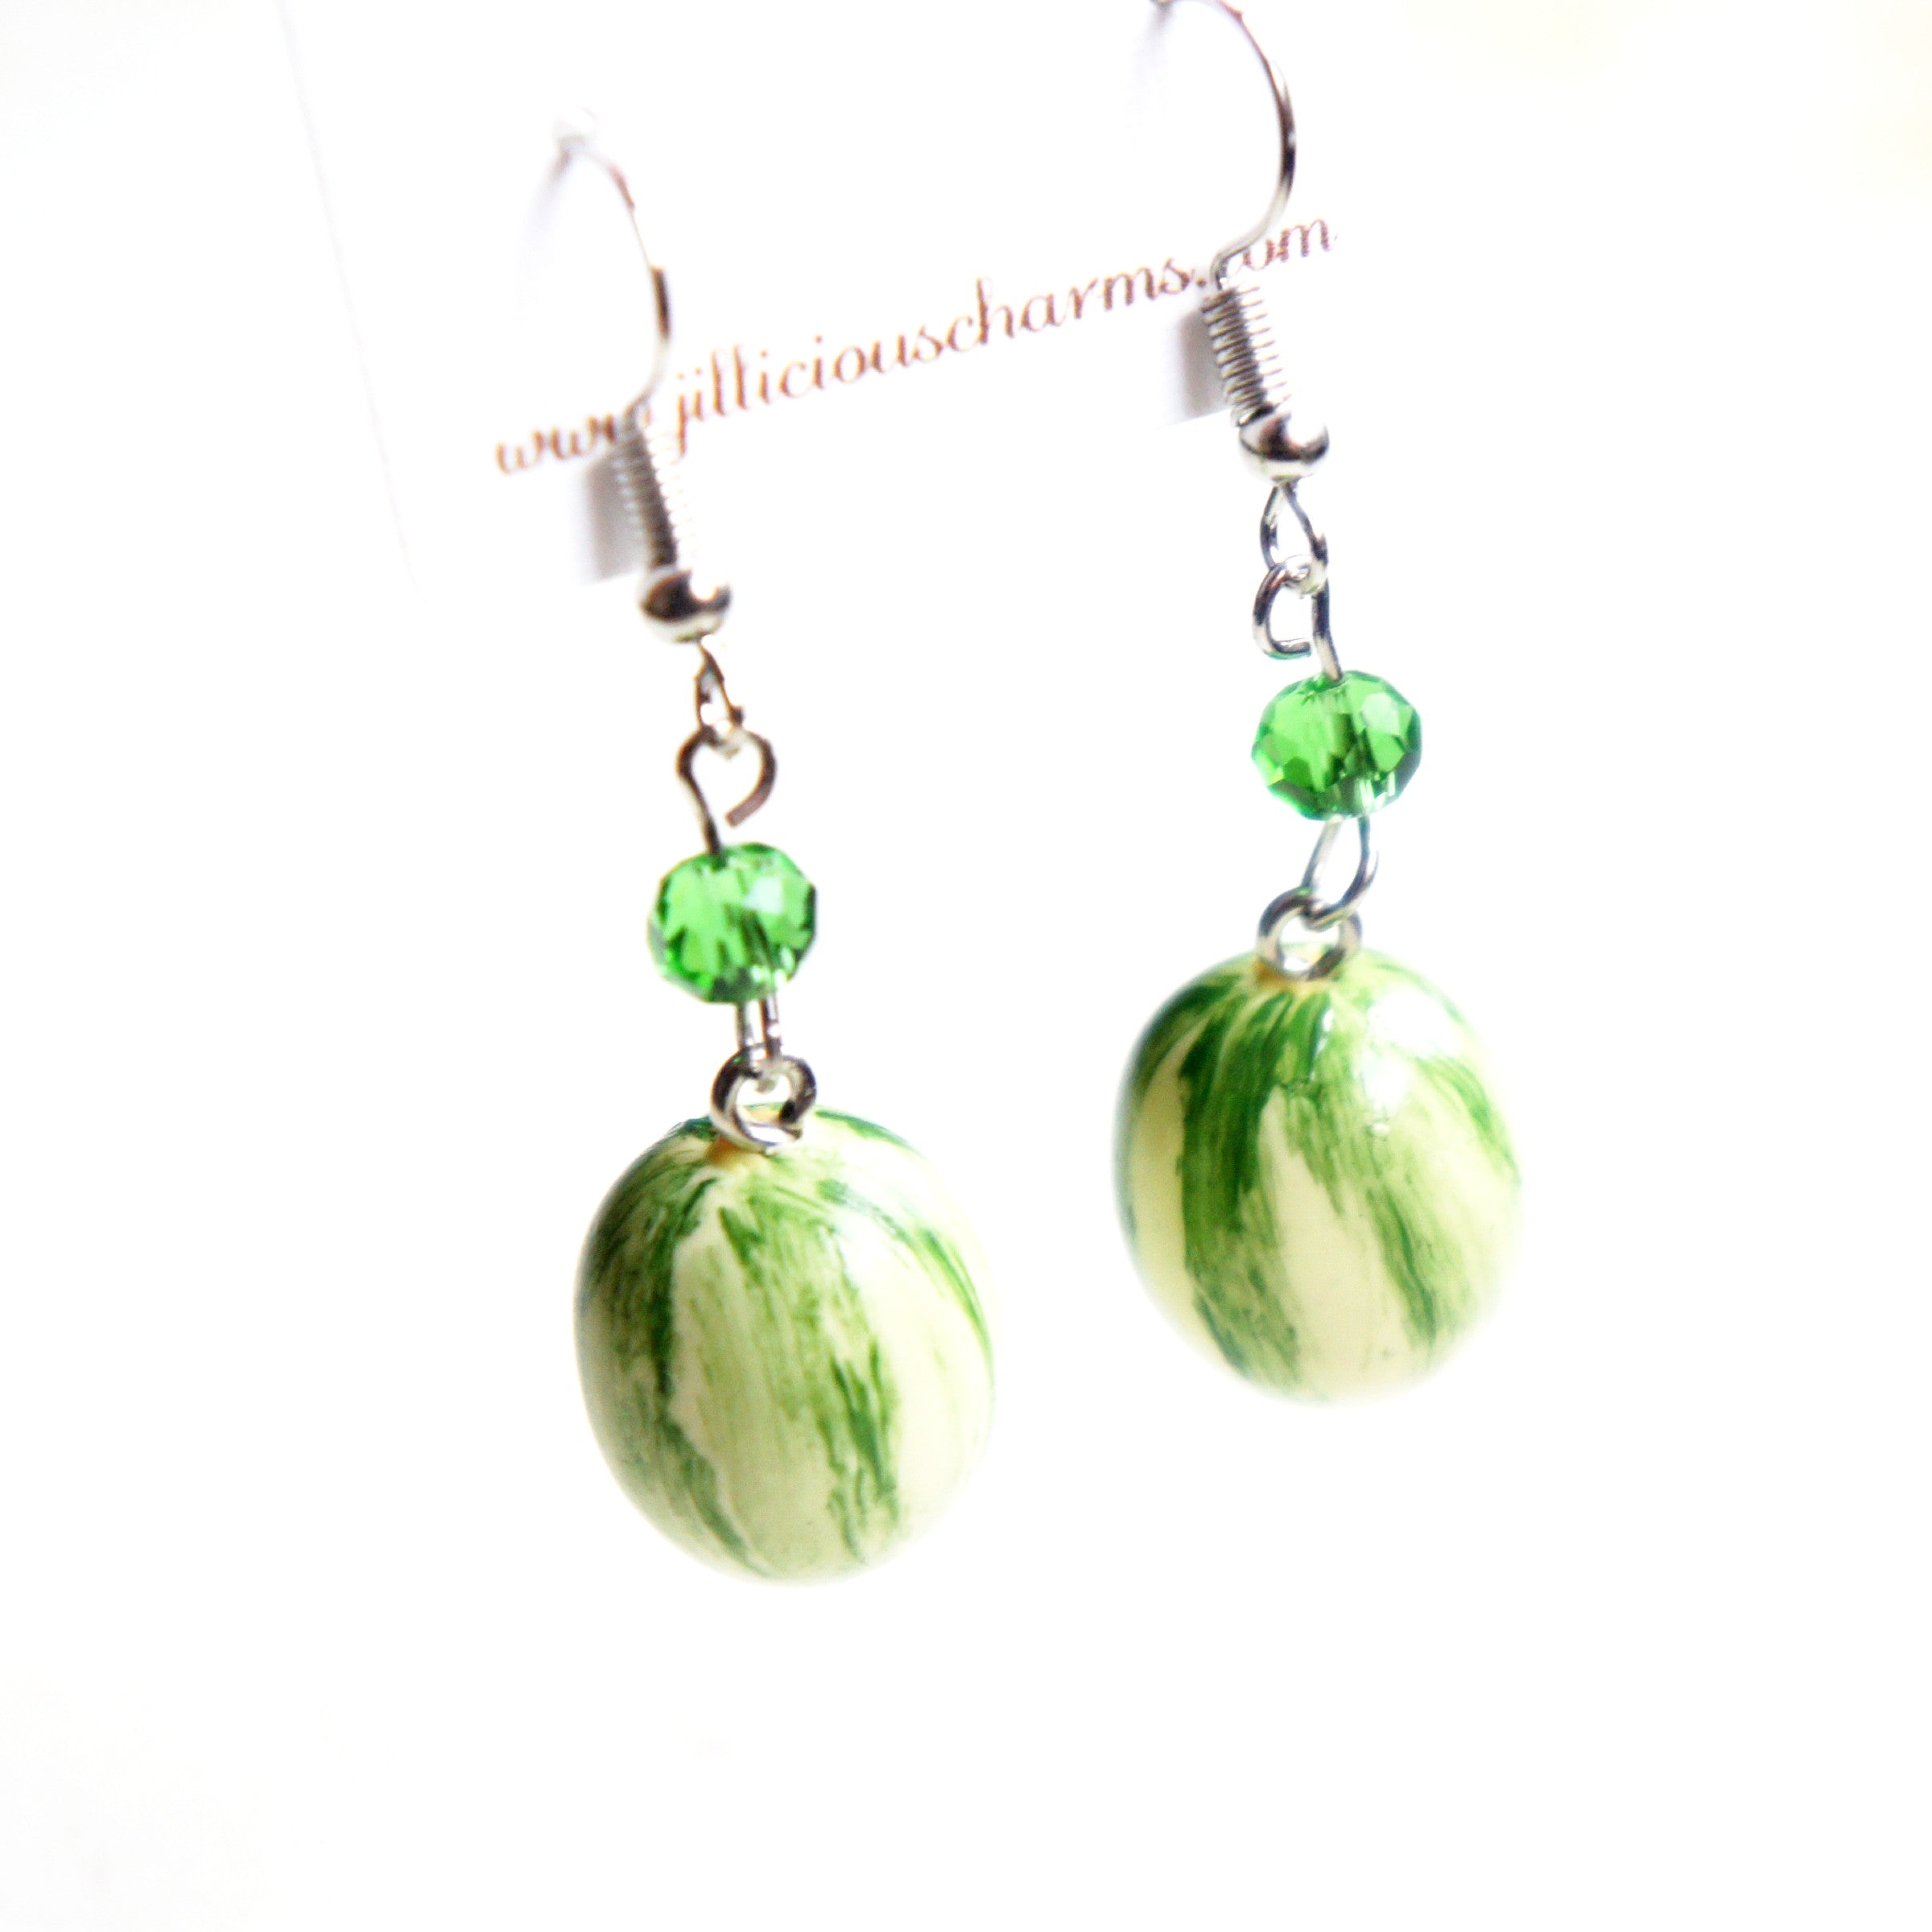 Watermelon Dangle Earrings - Jillicious charms and accessories